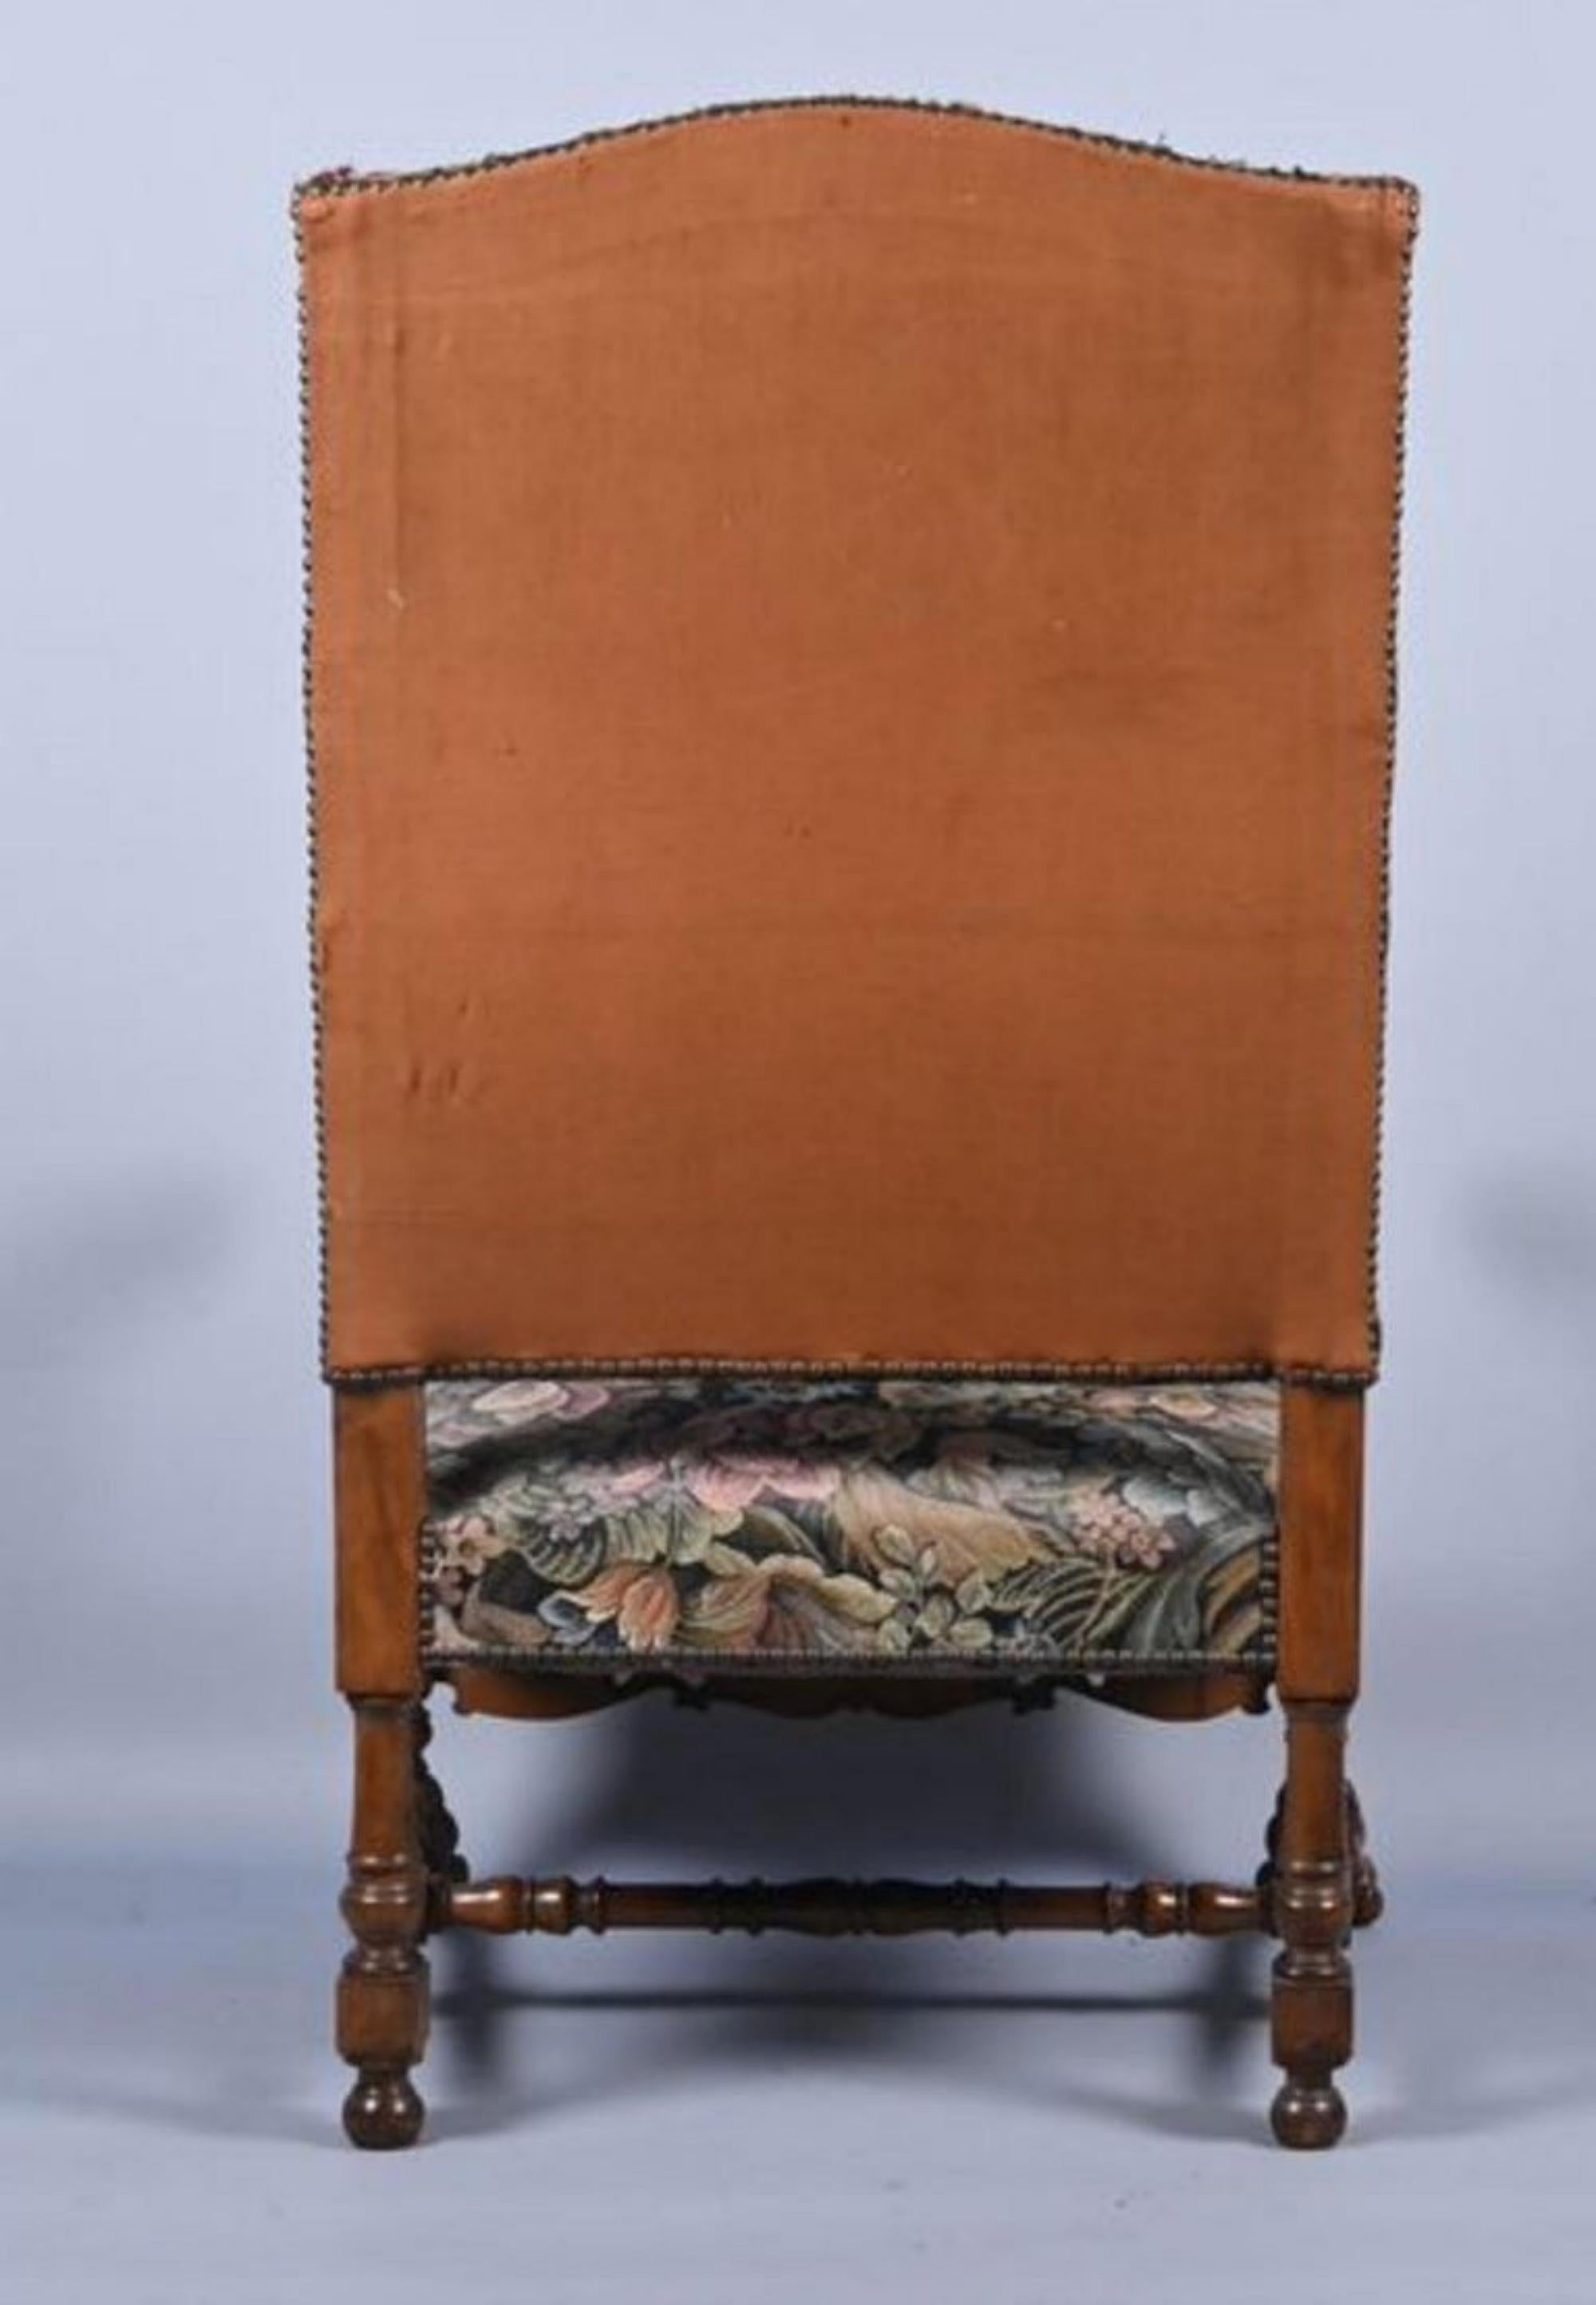 Baroque Rare Portuguese Chair 18th Century Rosewood with VIDEO For Sale